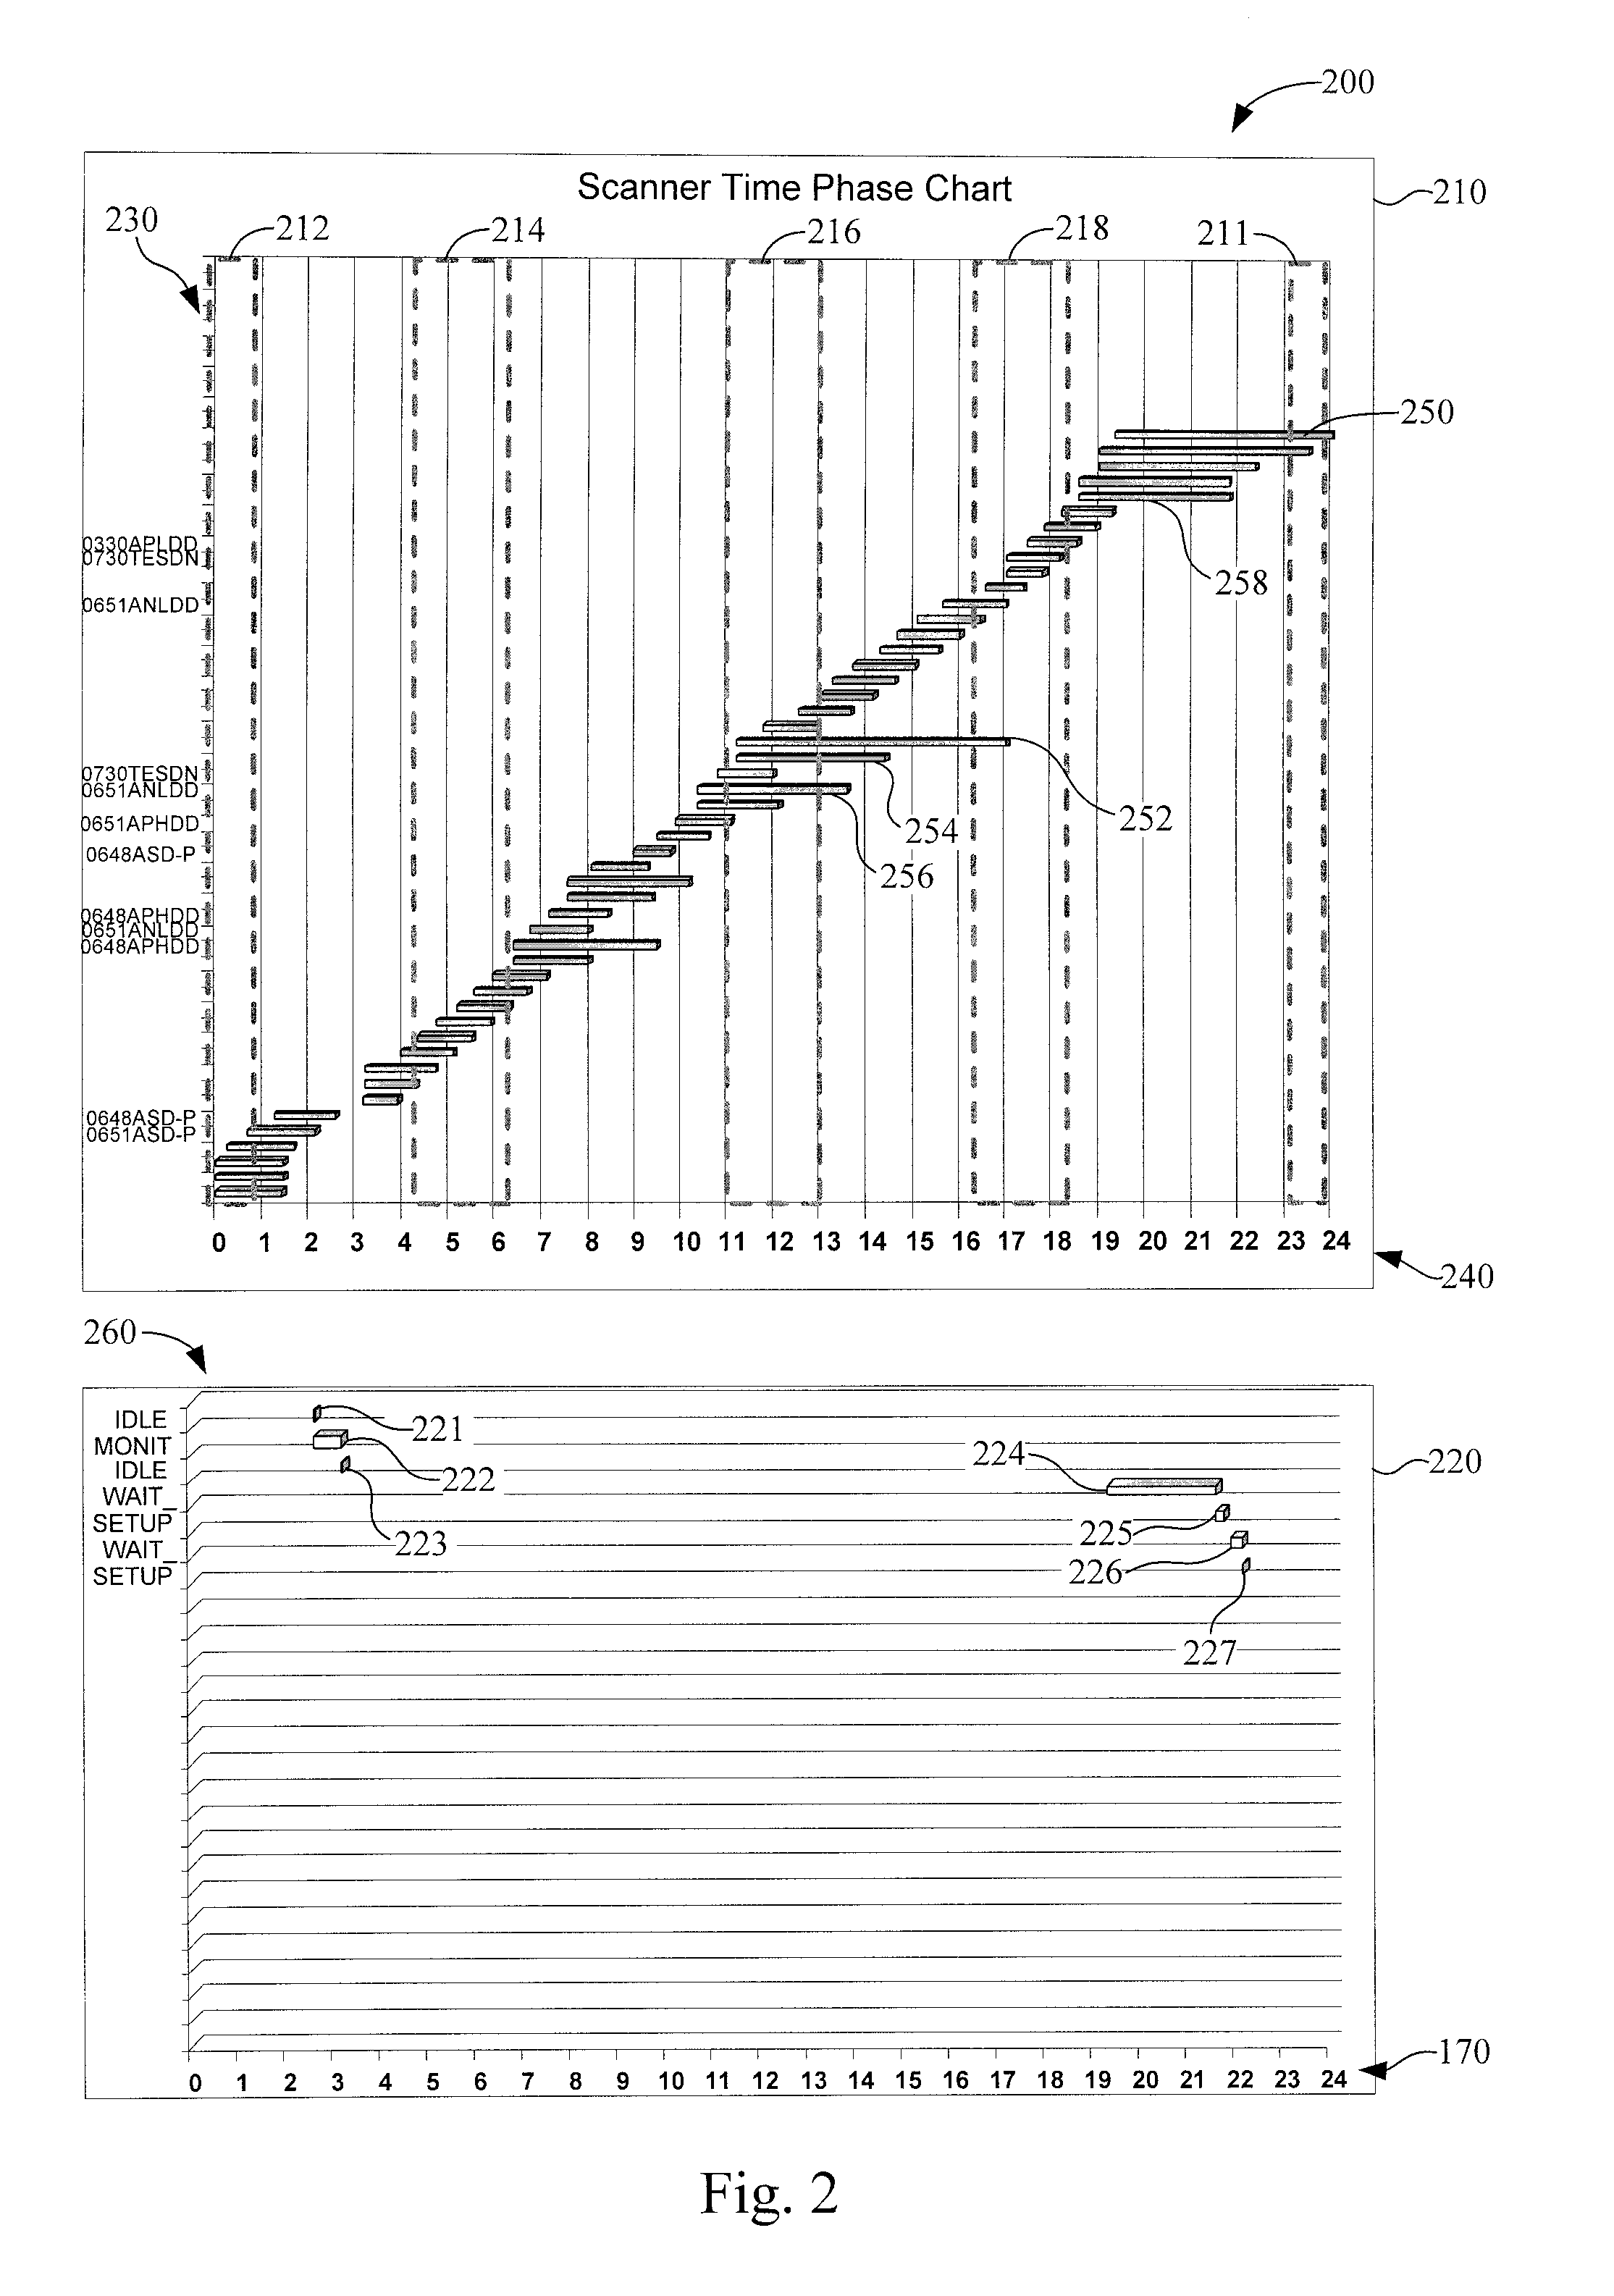 Monitoring system for manufacturing semiconductor wafers